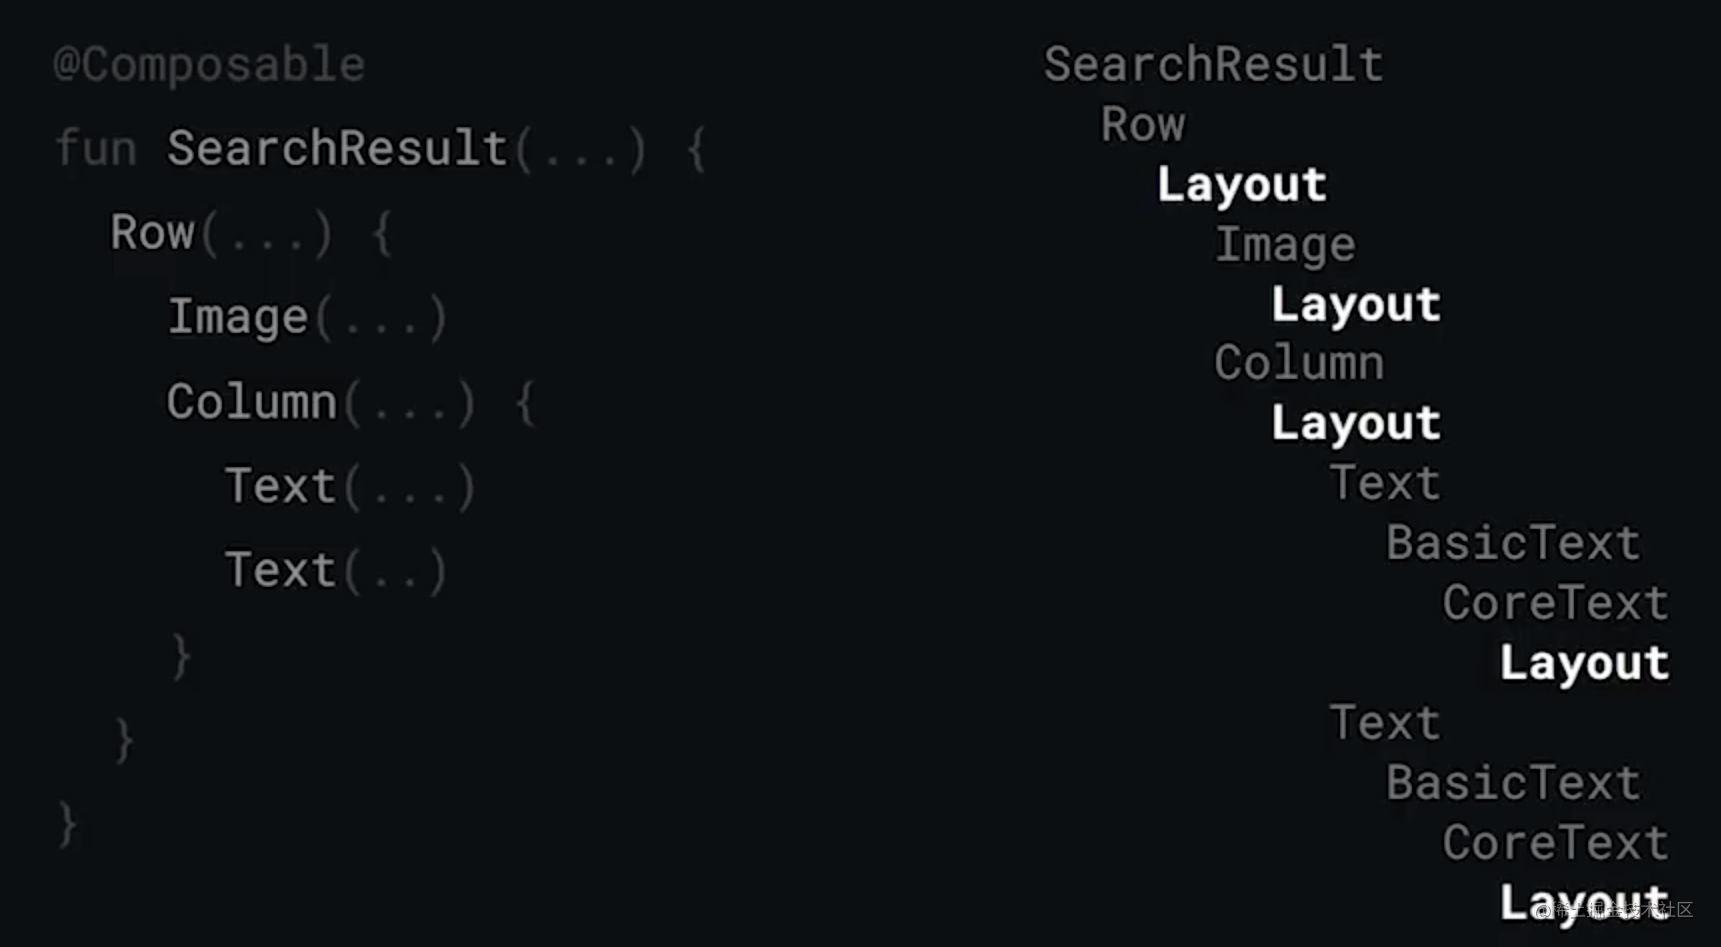 △ Each composable item contains one or more Layouts